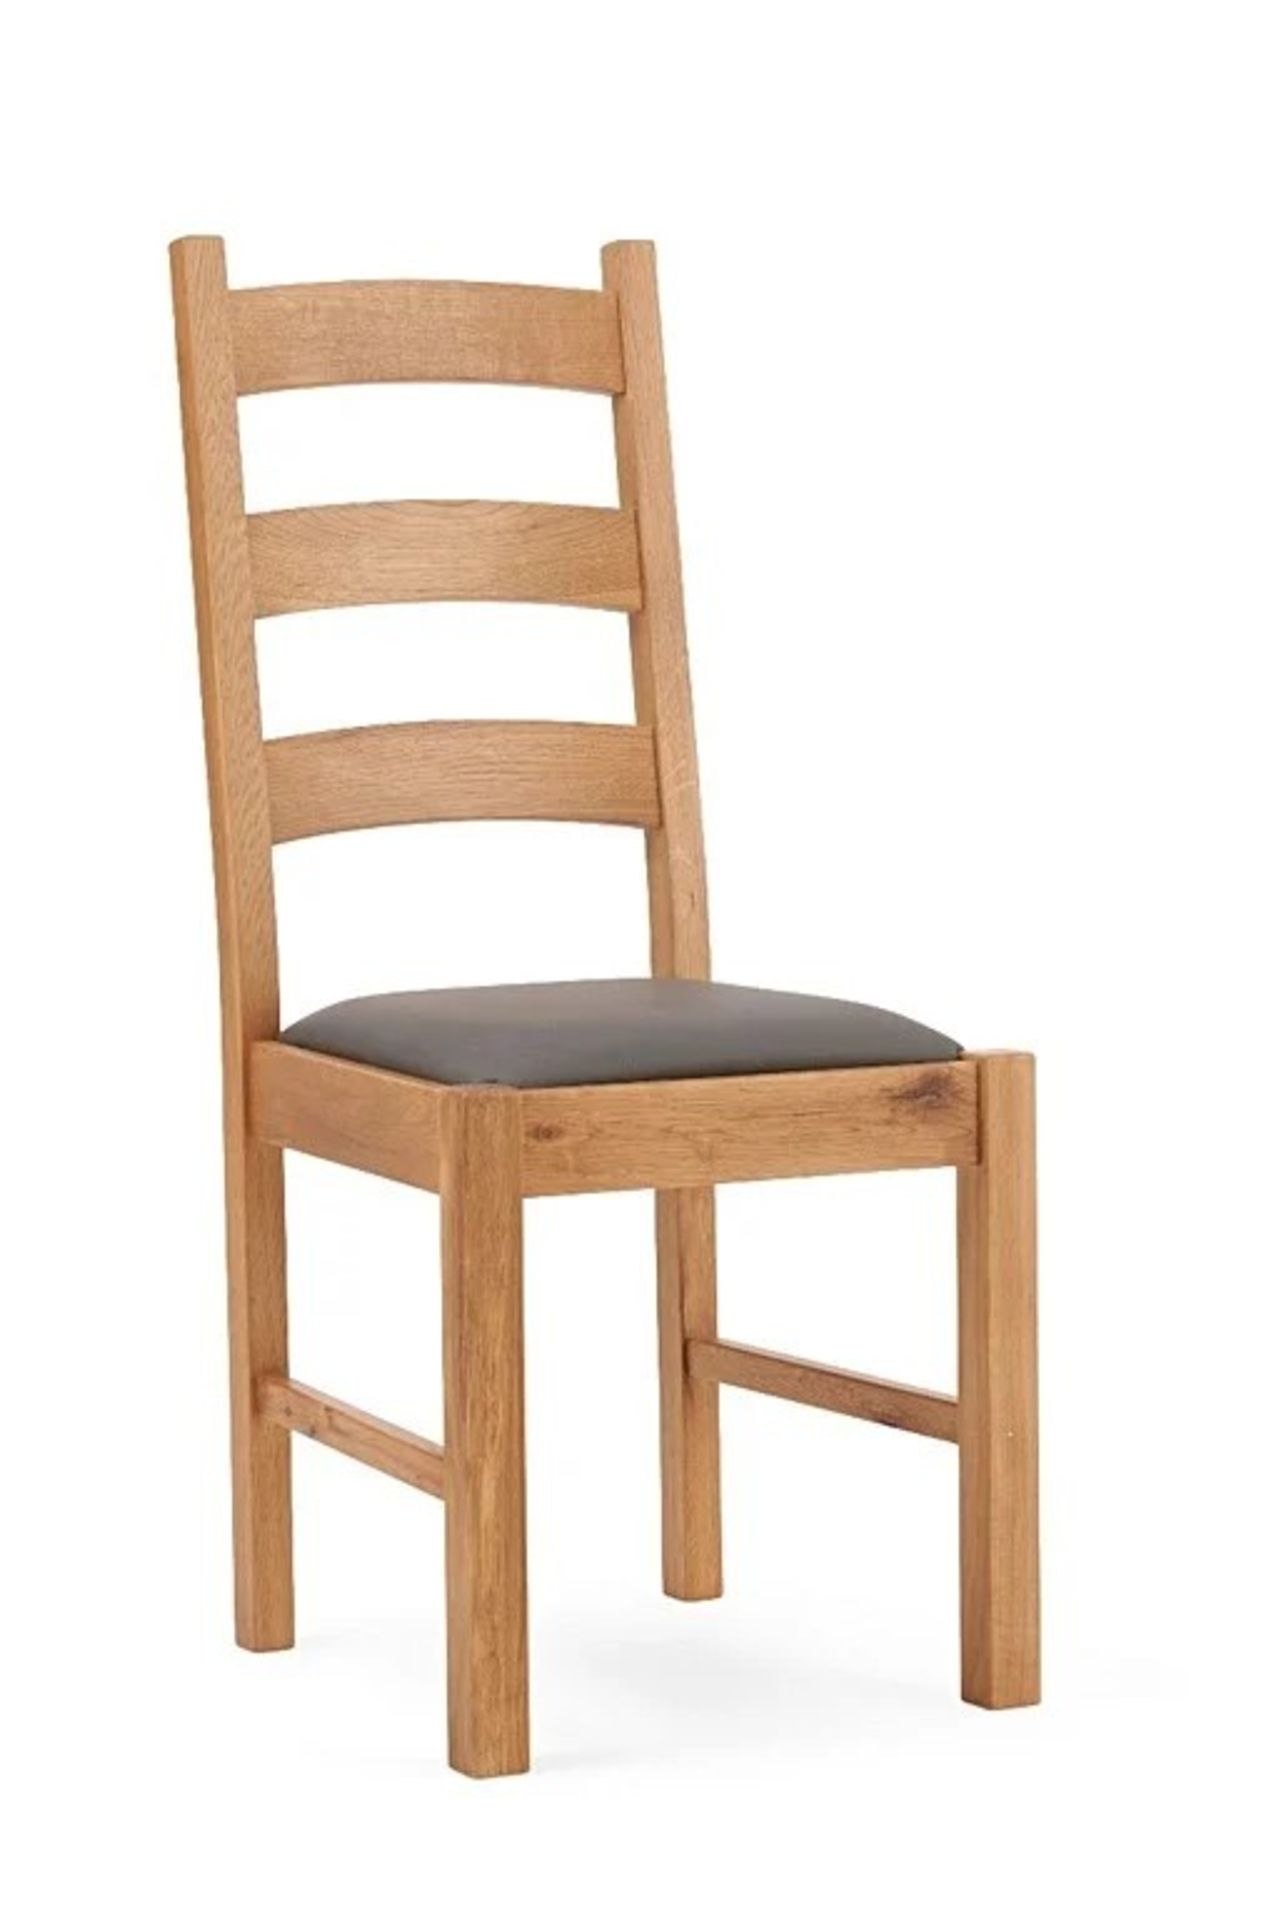 A set of 3 x Vermont Solid Oak Dining Chairs Expertly crafted from elm and oak, these robust slatted